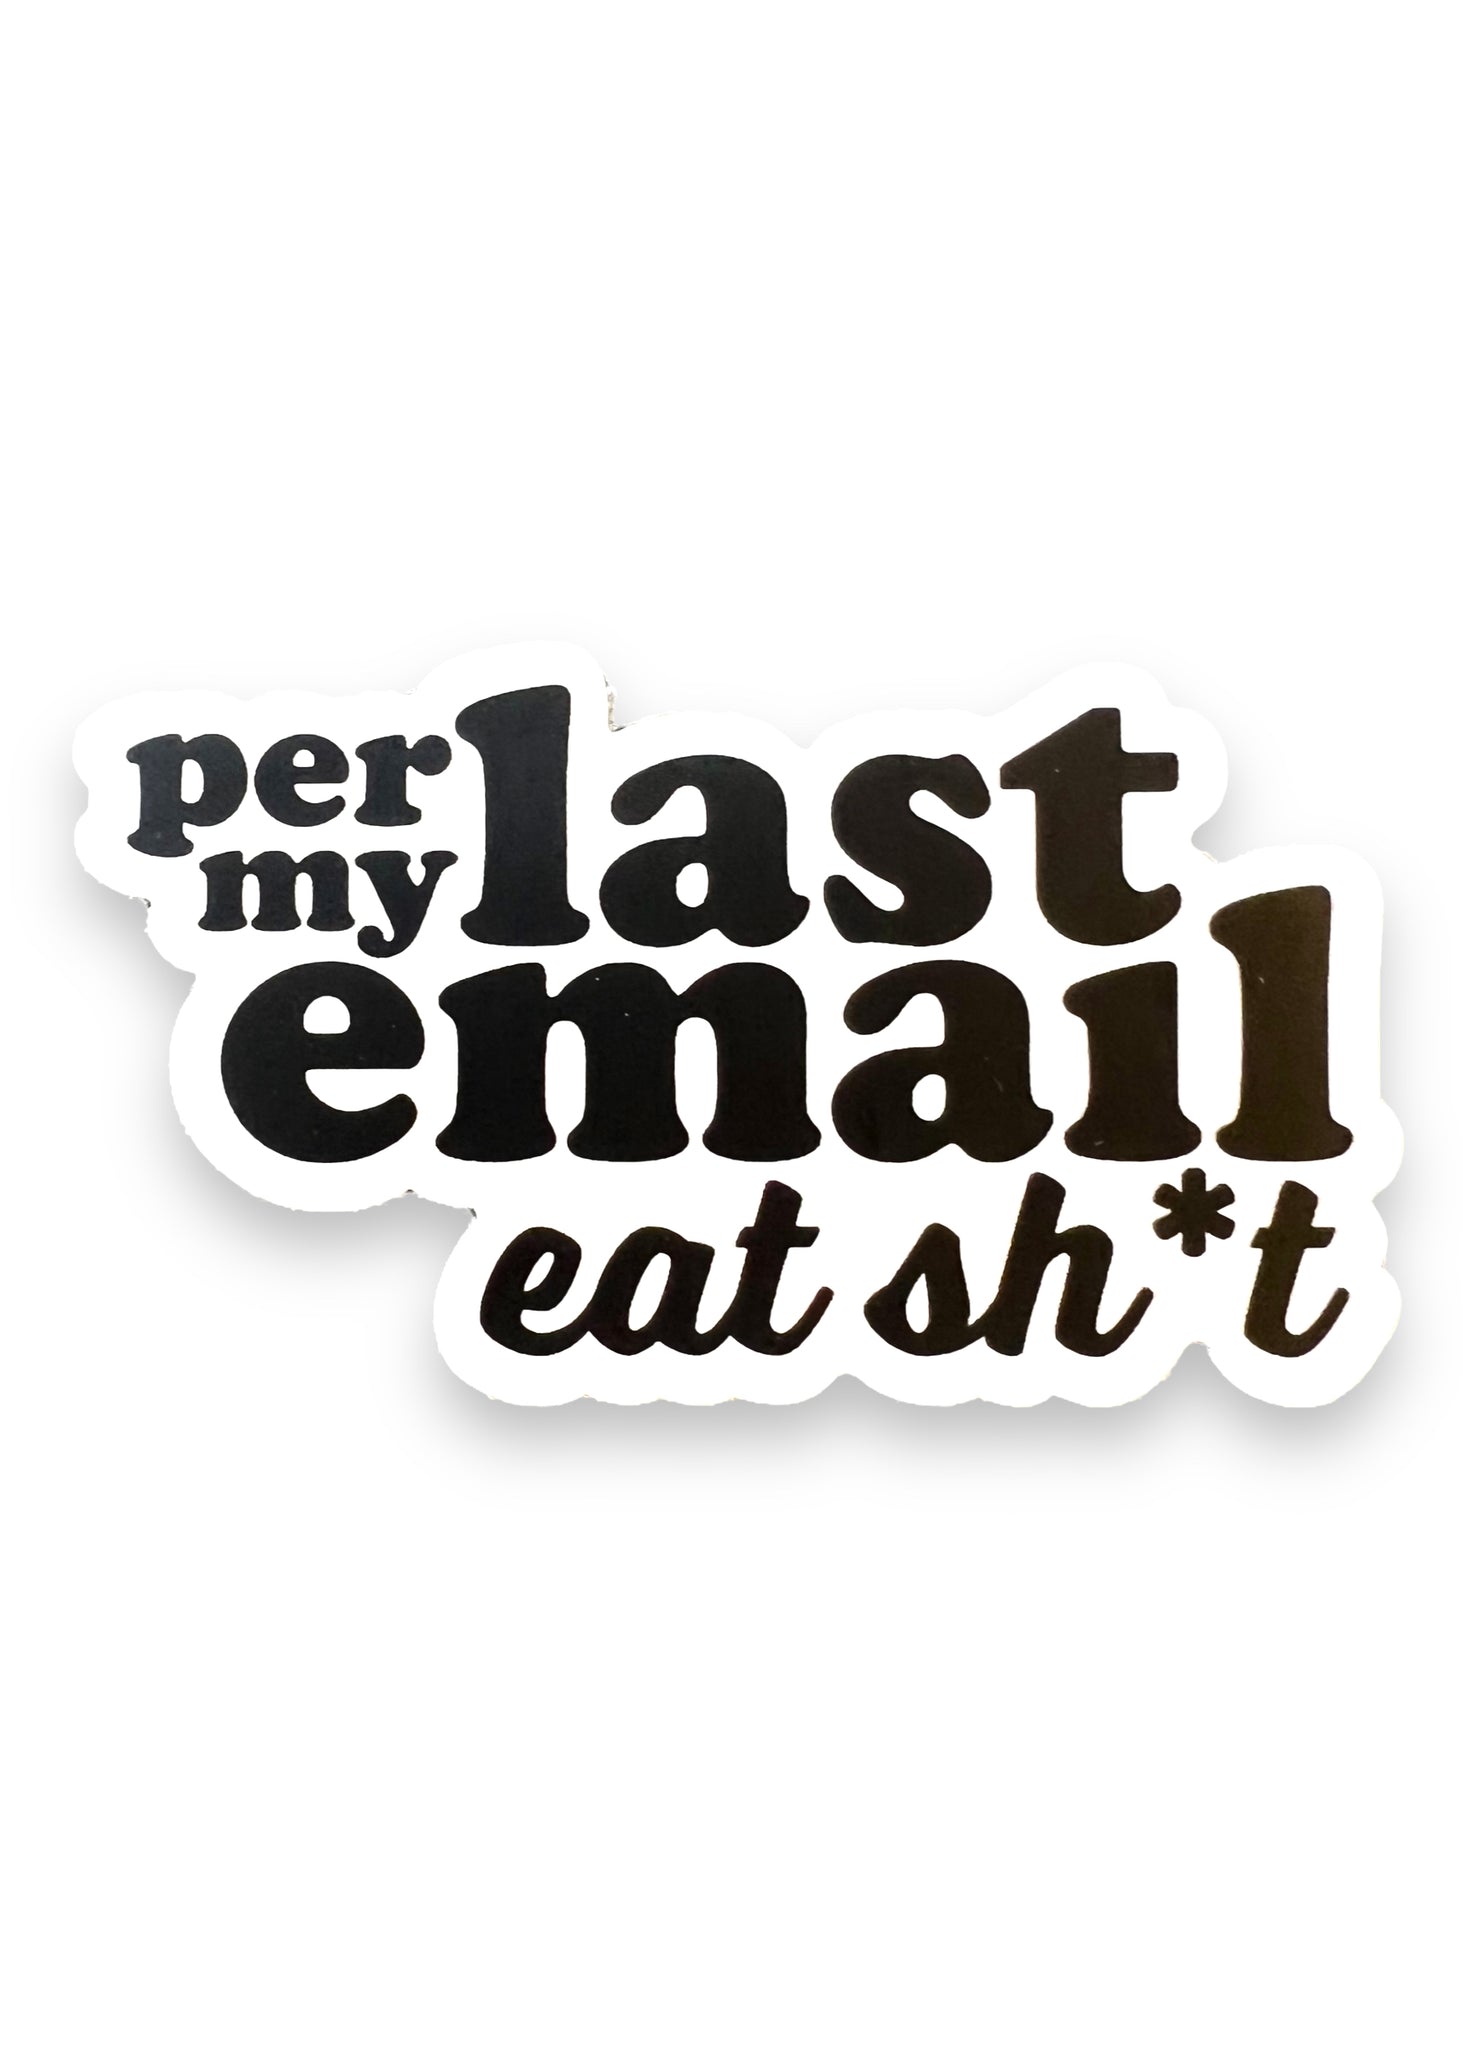 Per My Last email, eat shit Sticker by Big Moods, Sold by Le Monkey House